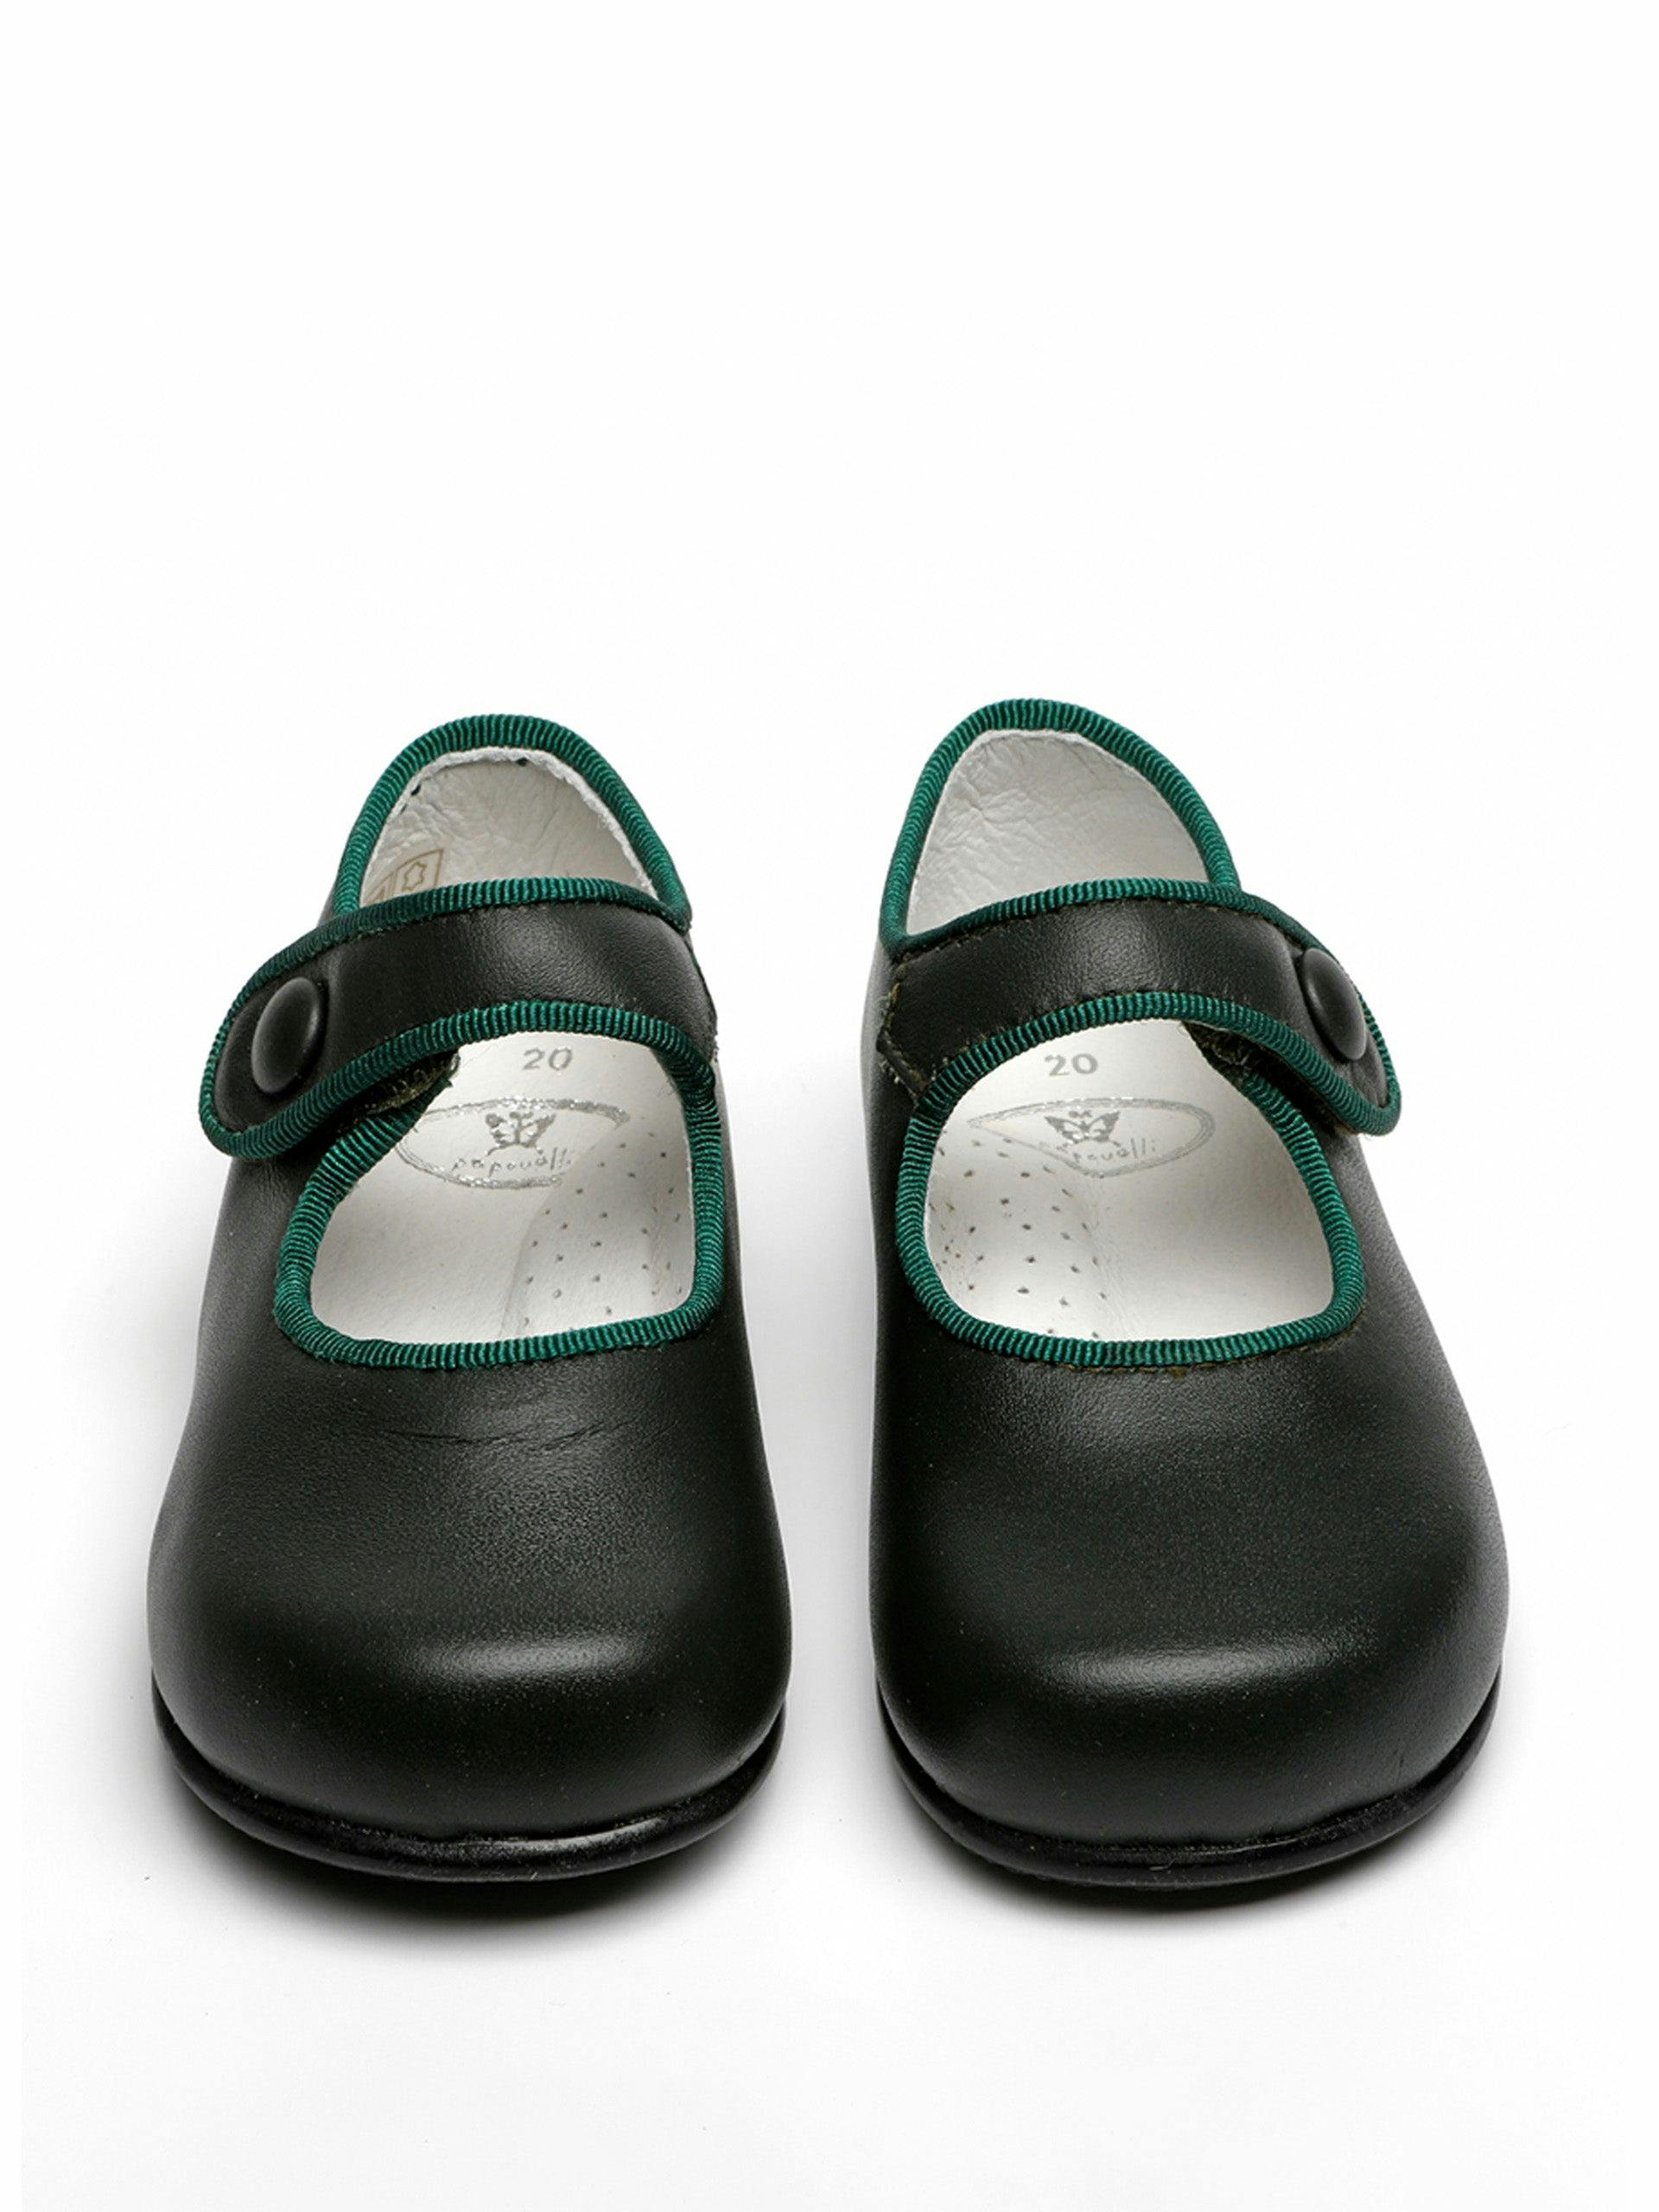 Navy and bottle green leather Catalina shoes